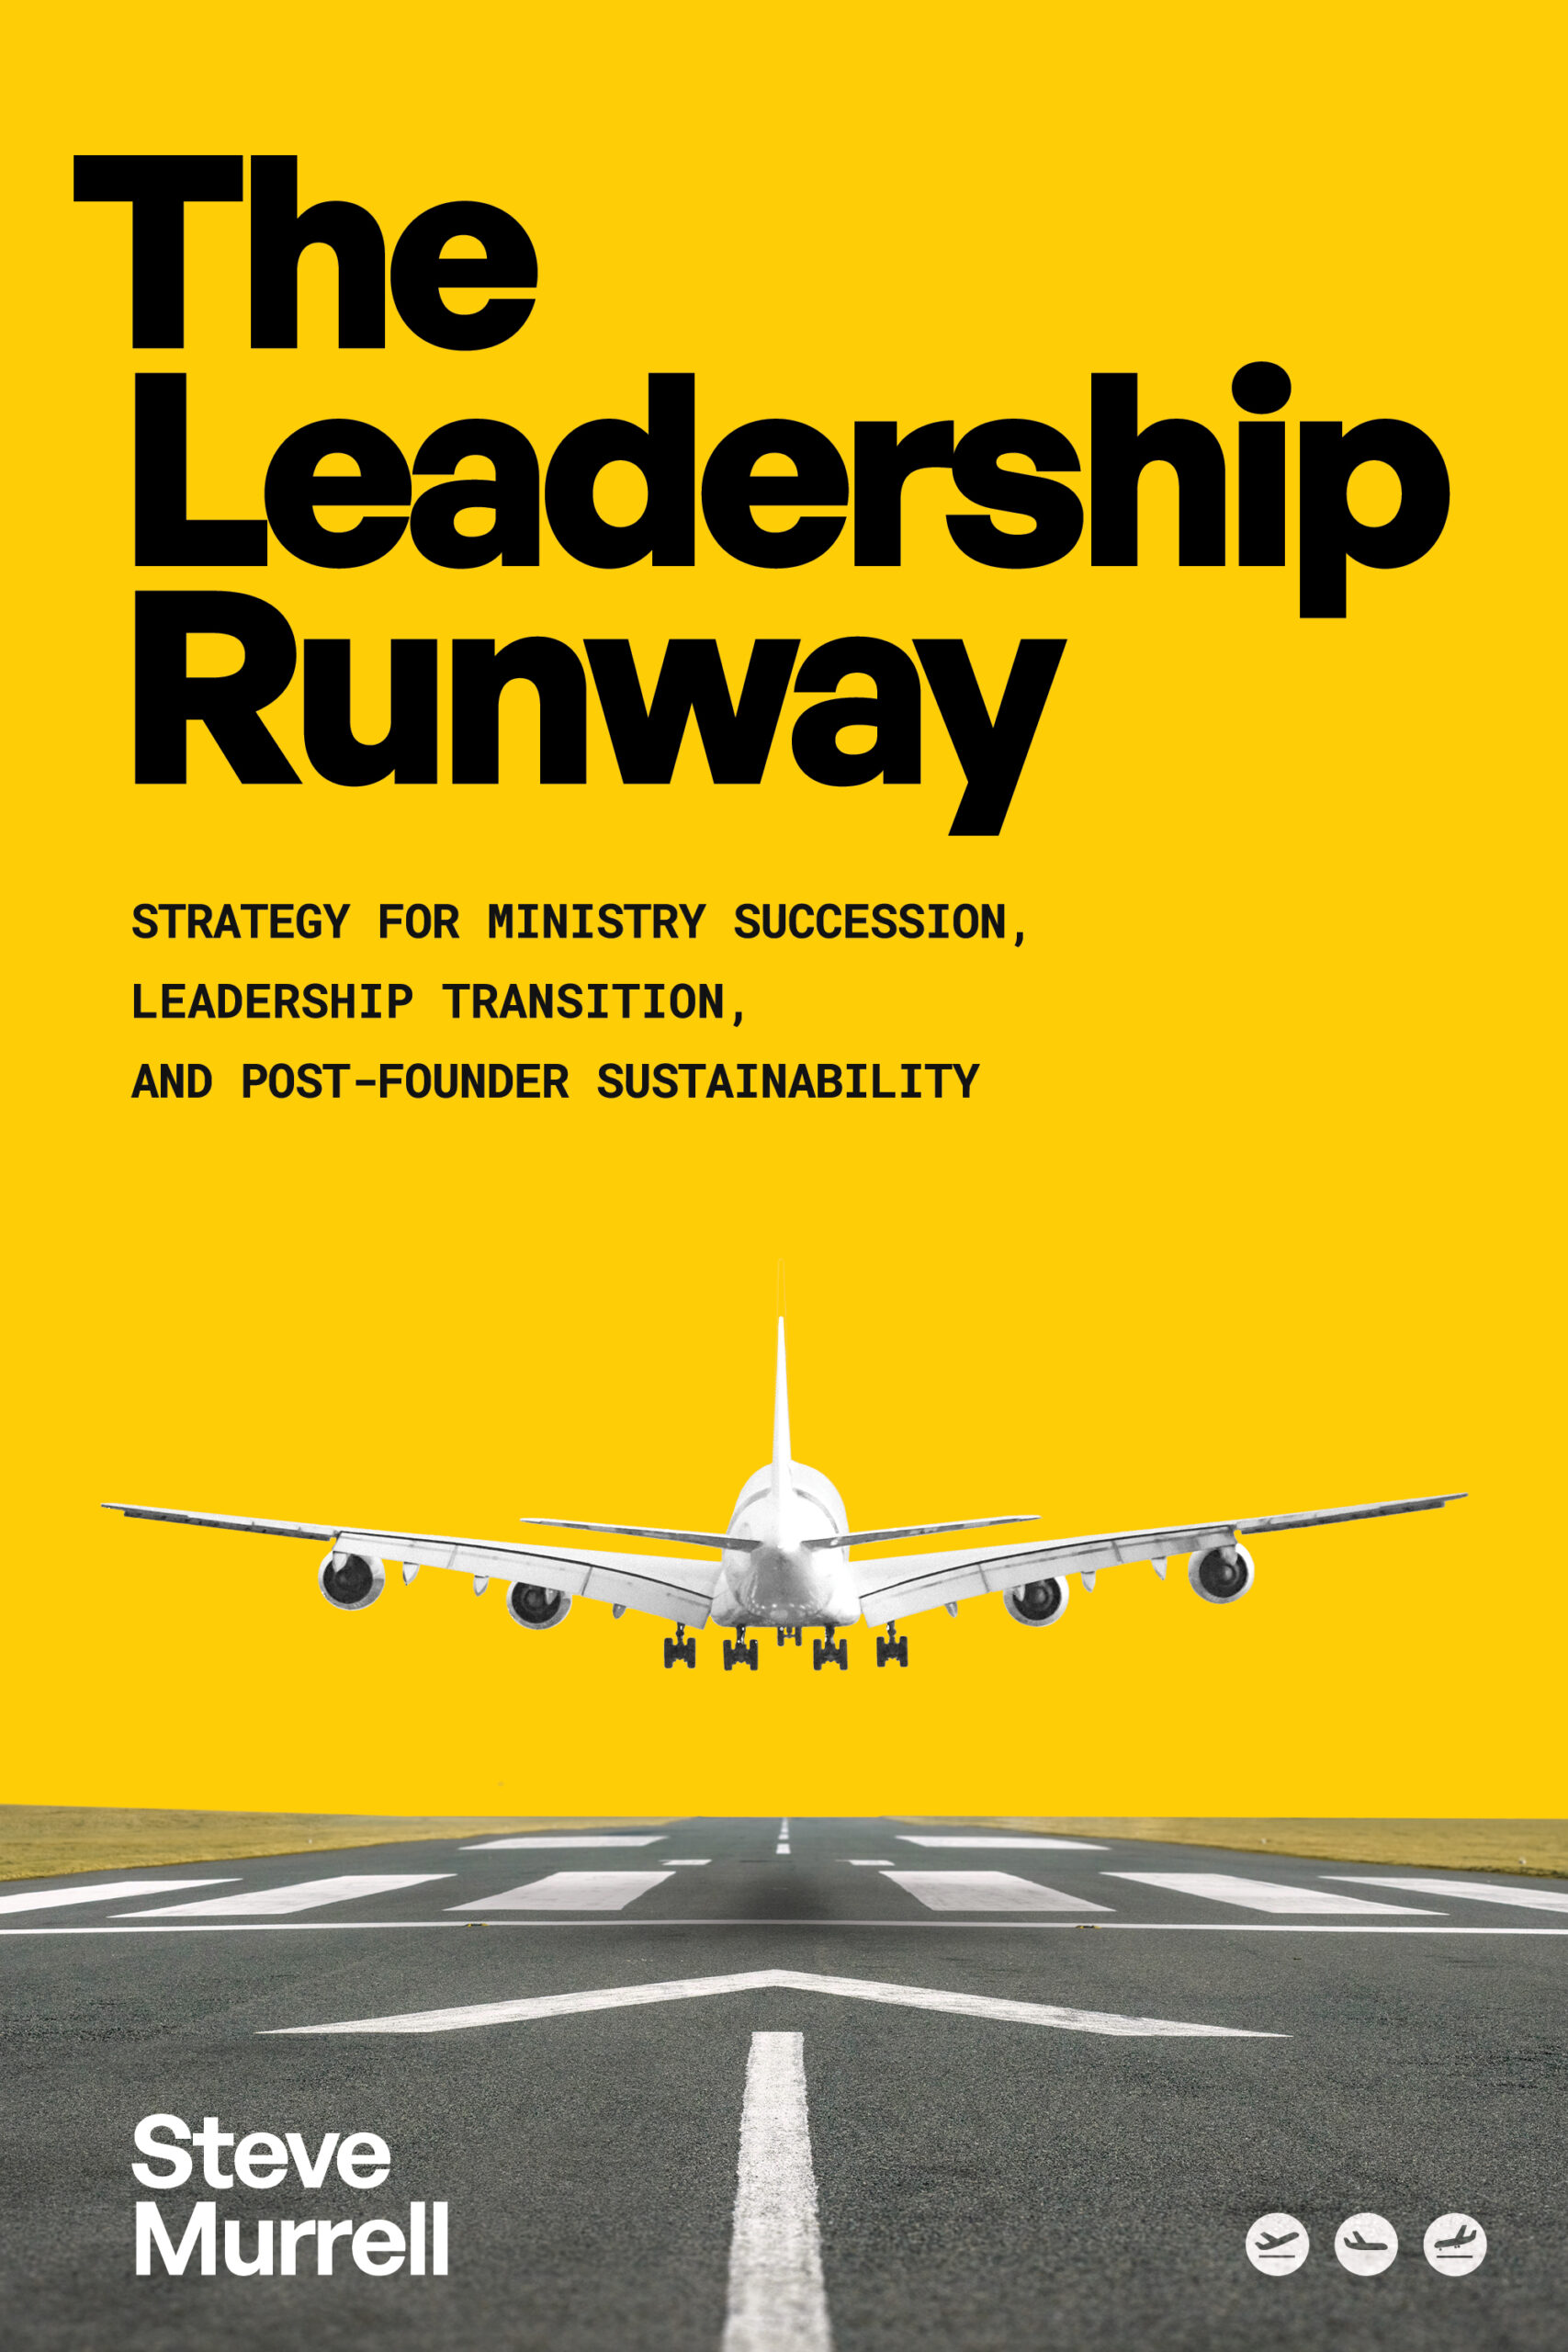 The Leadership Runway: A Strategy for Ministry Succession, Leadership Transition, and Post-Founder Sustainability-image